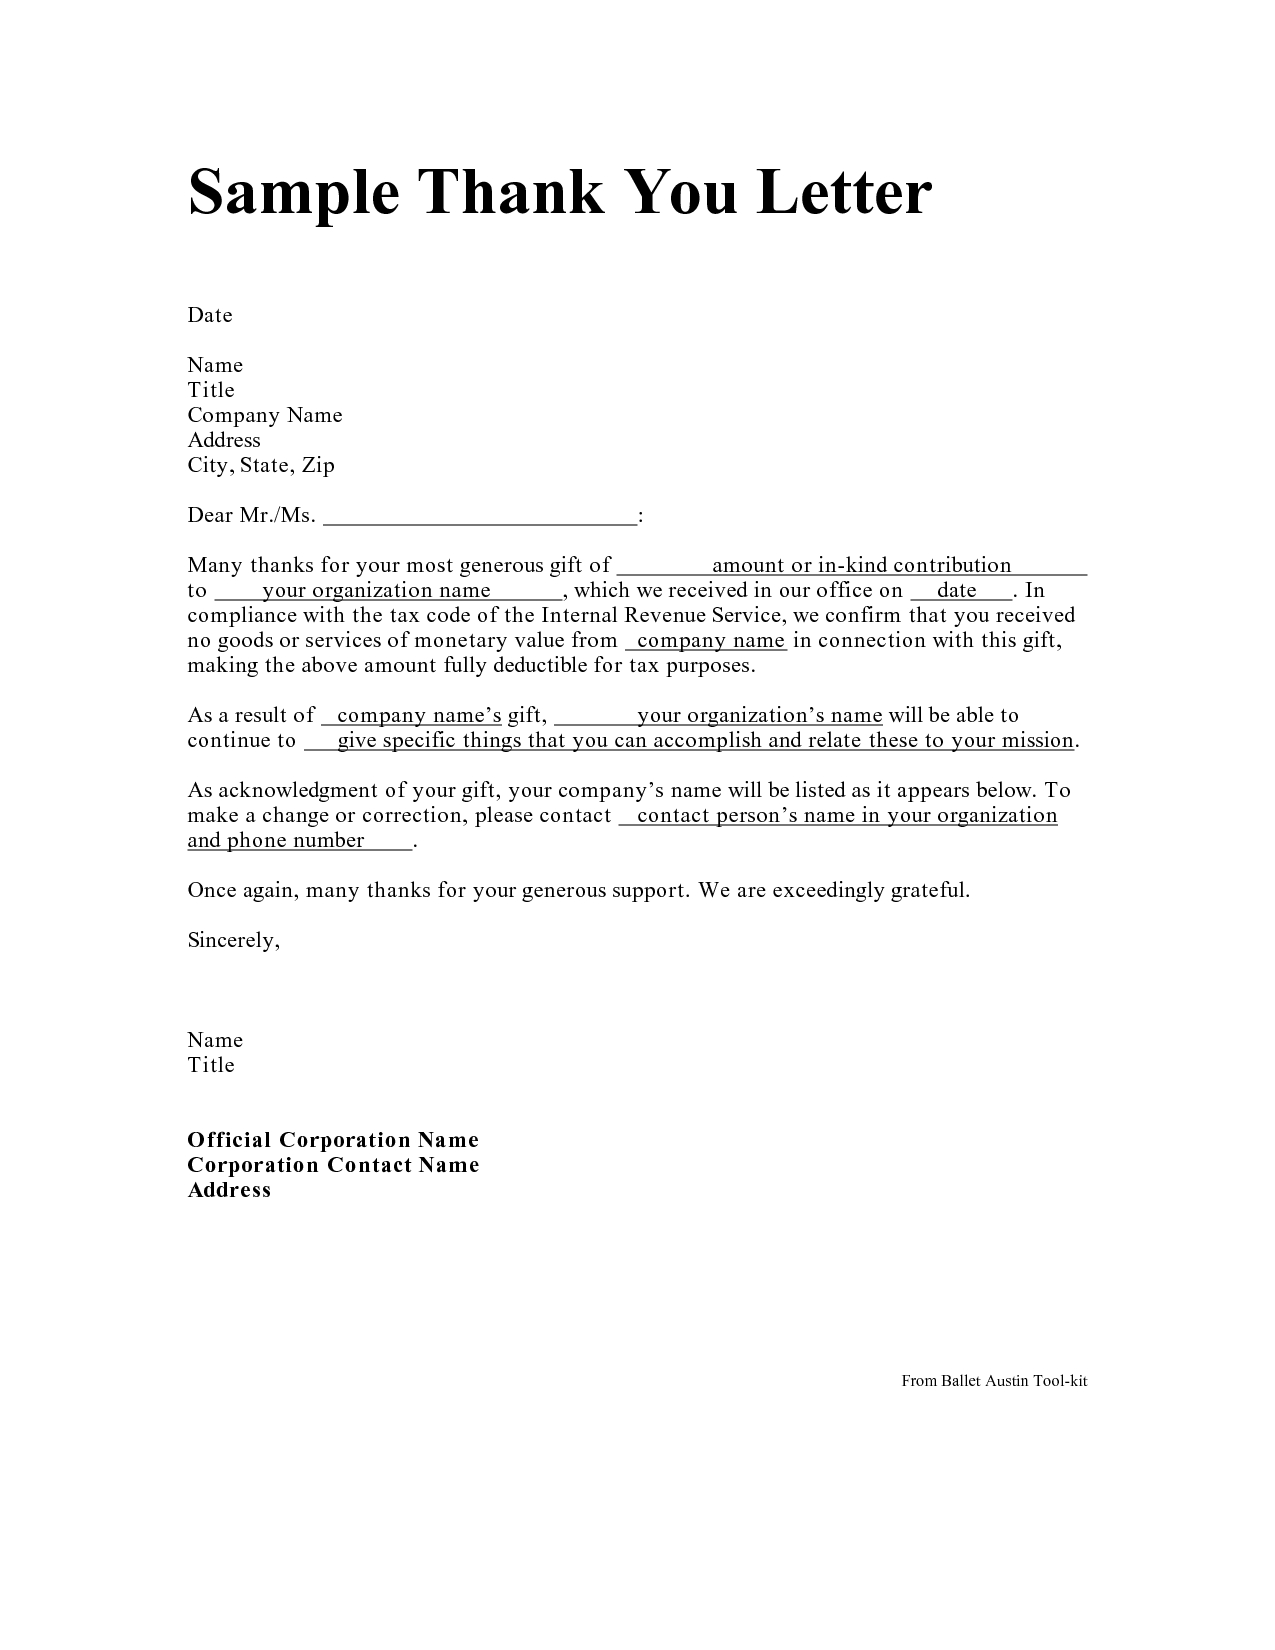 Vehicle Donation Letter Template - Personal Thank You Letter Personal Thank You Letter Samples